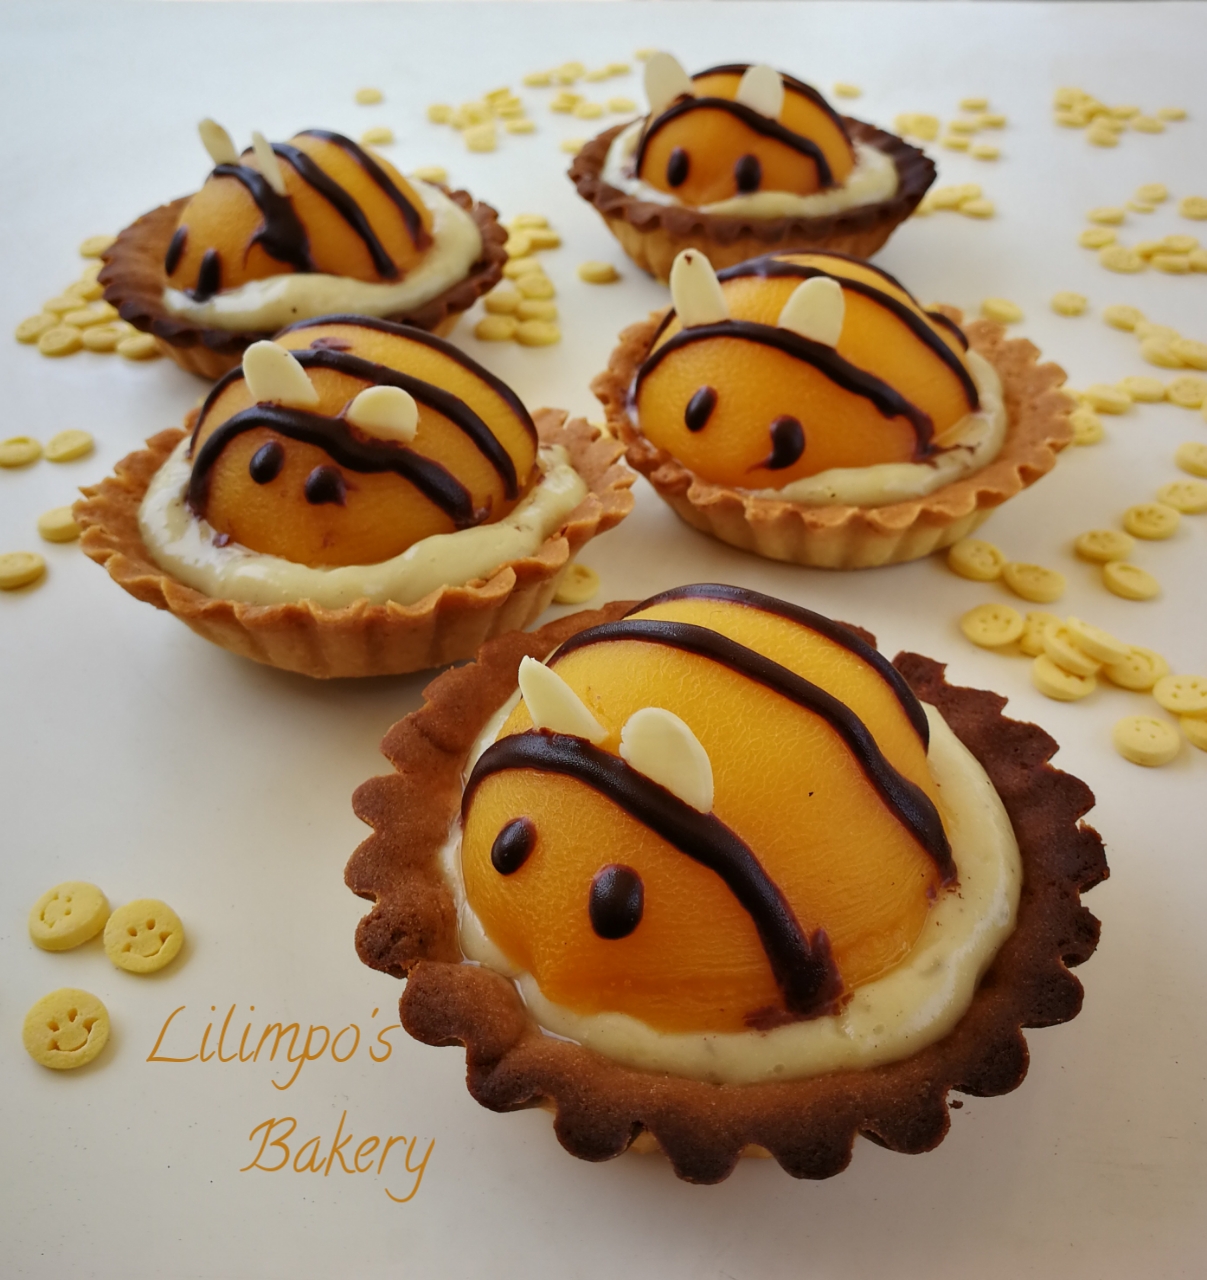 Lilimpo’s Bakery